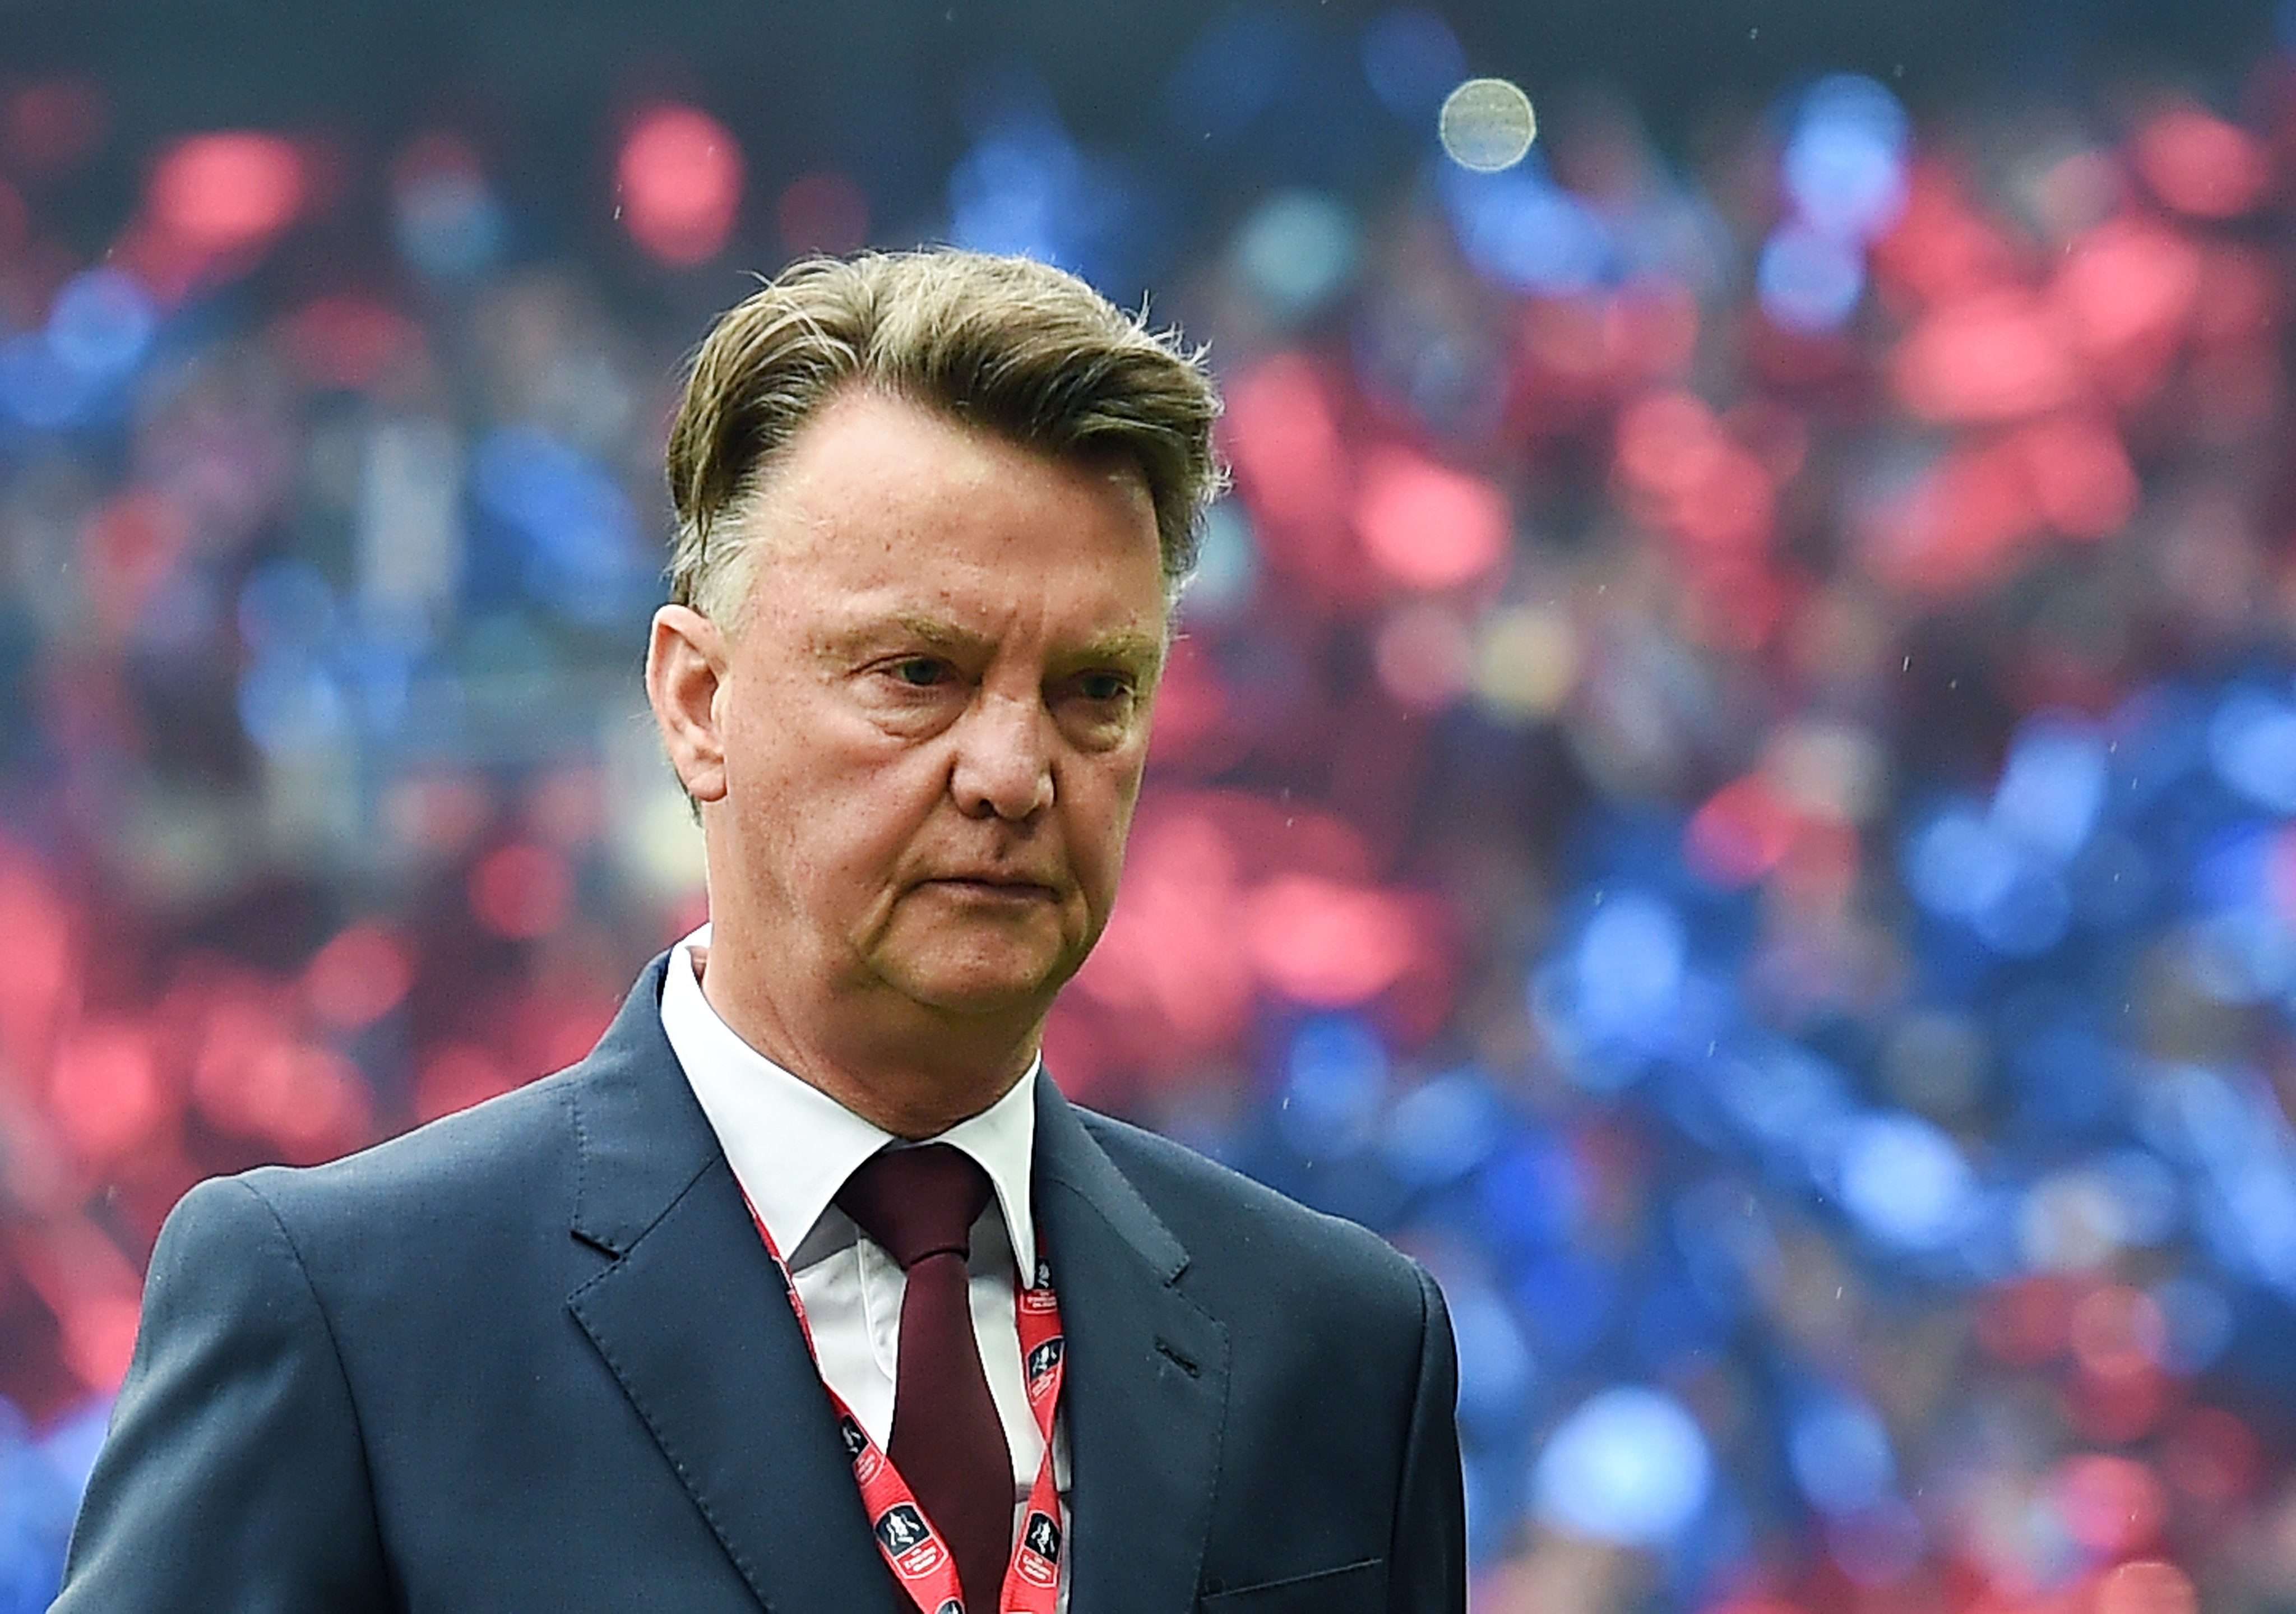 Manchester United manager Louis van Gaal believes his reign is coming to an end. Photo: EPA